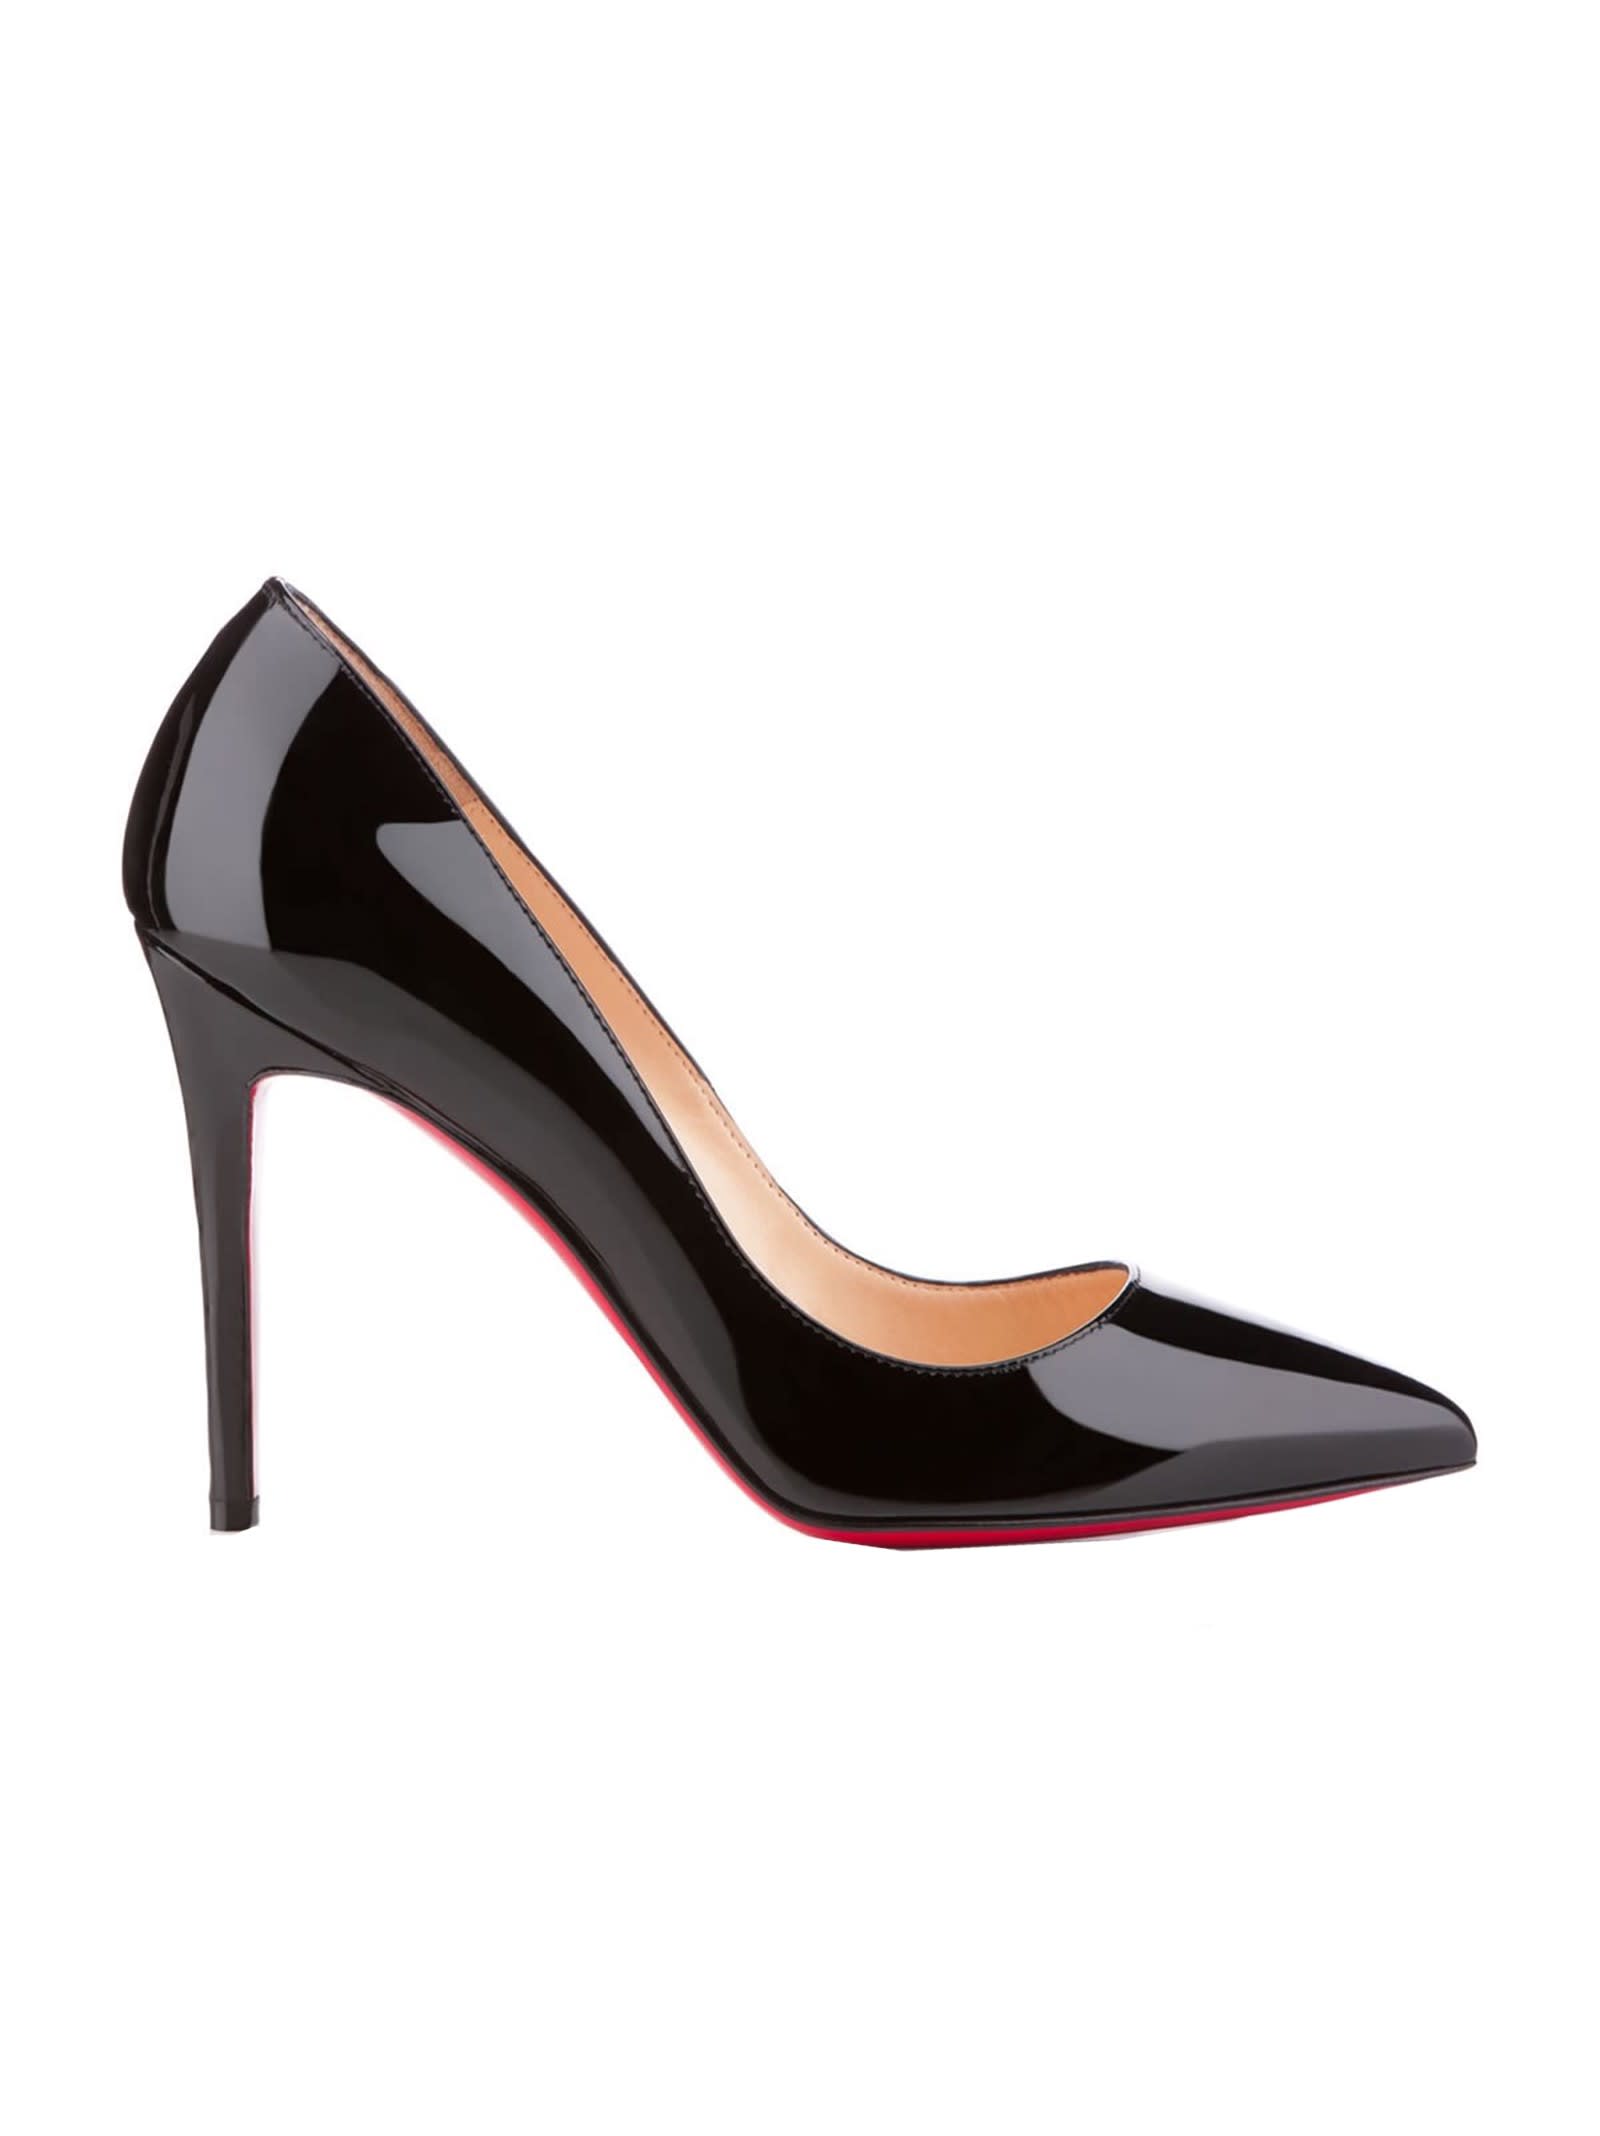 Buy Christian Louboutin Black Patent Leather Pumps online, shop Christian Louboutin shoes with free shipping